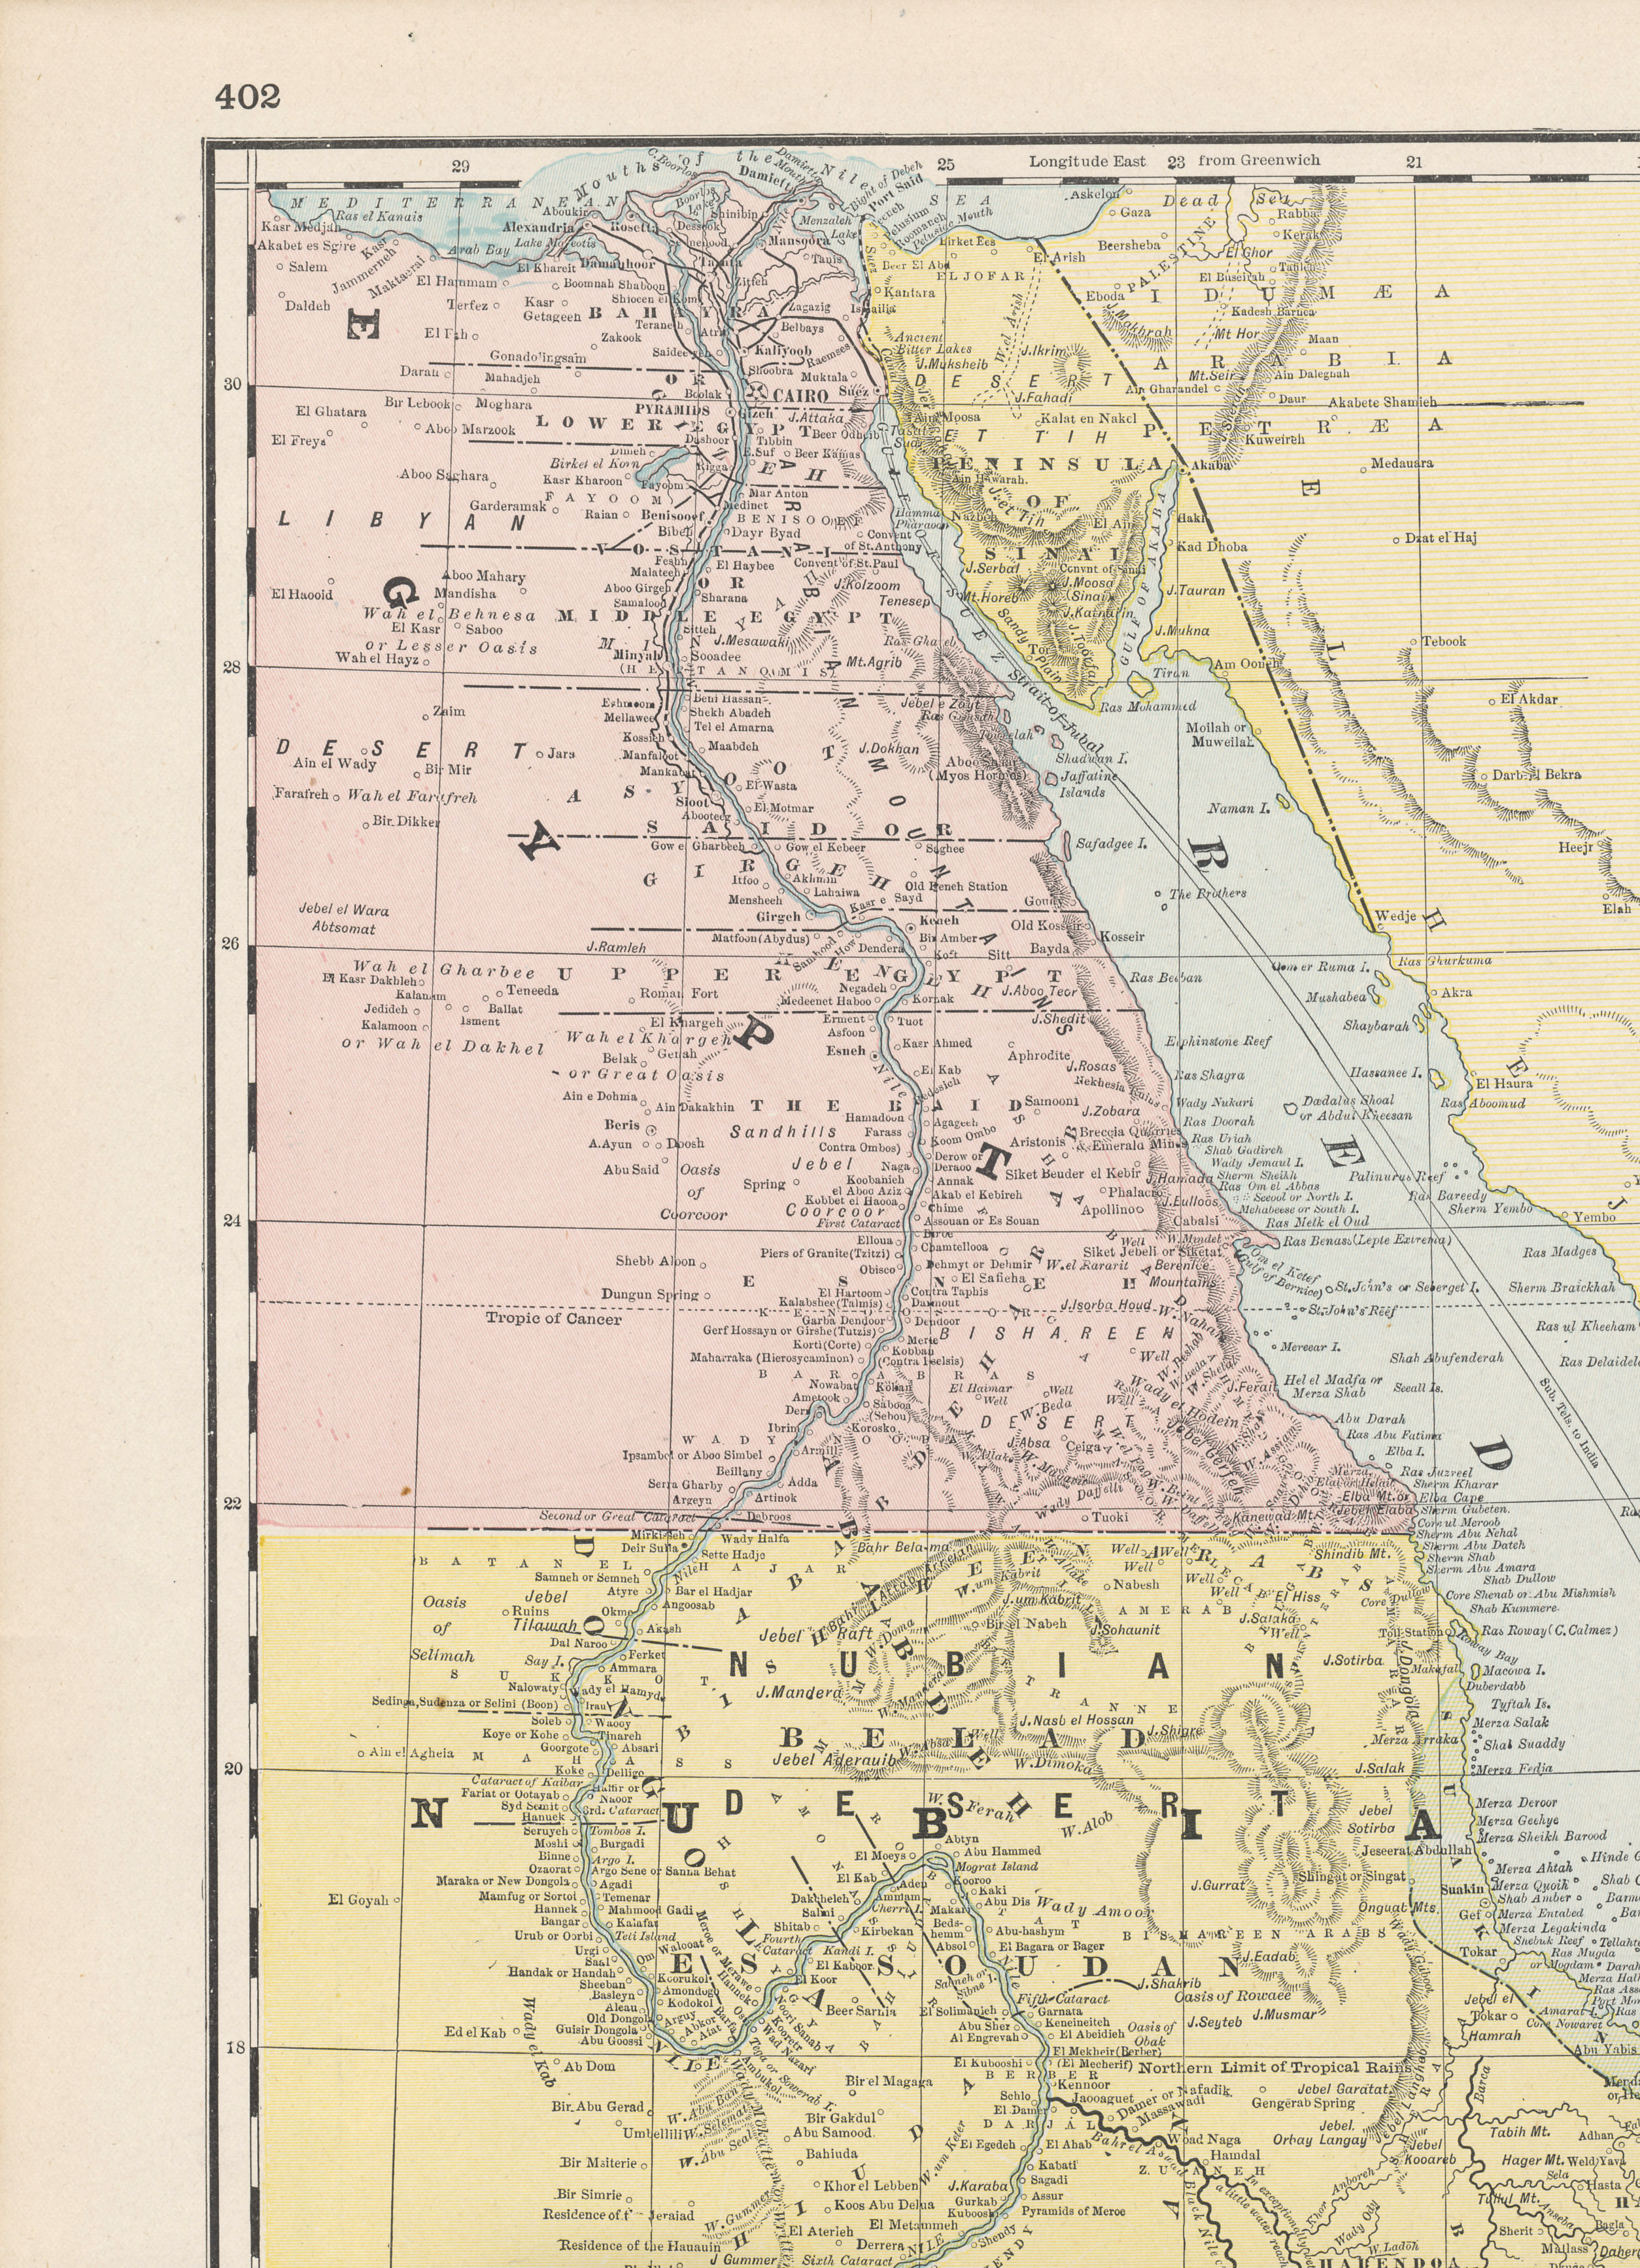 Egypt and Sinai from Cram's 1896 Railway Map of the Turkish Empire.